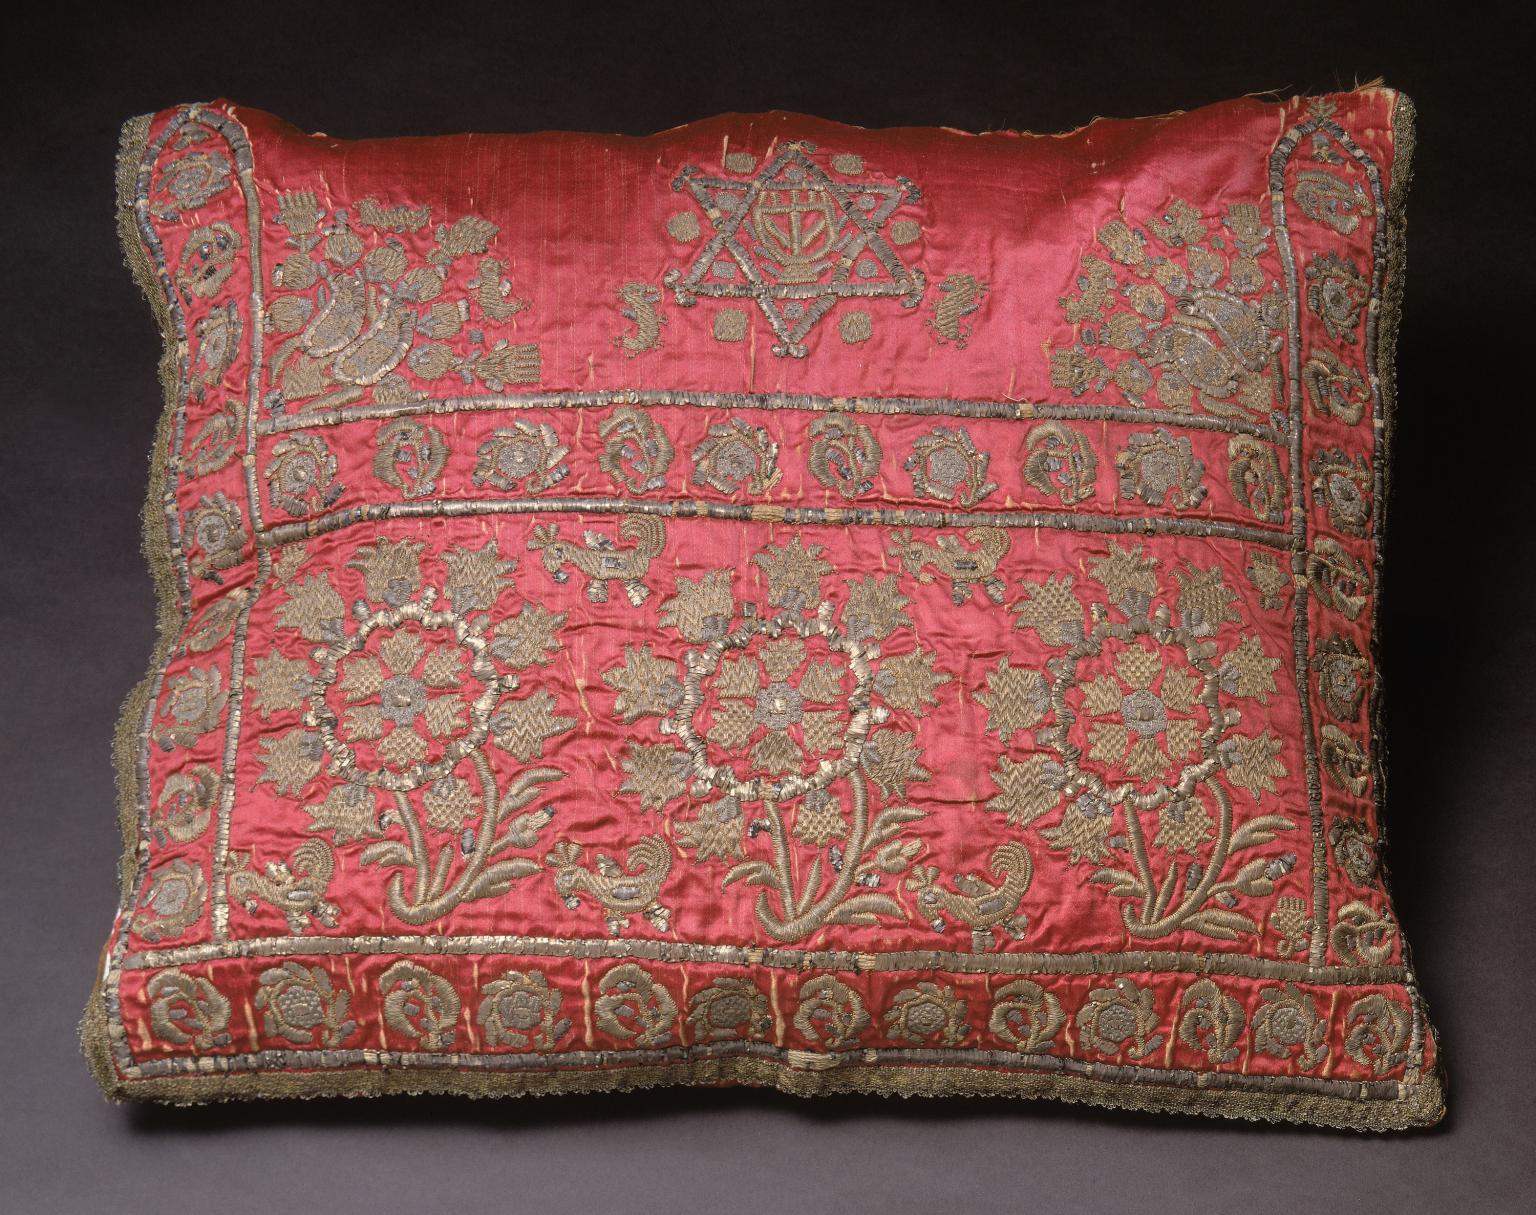 Cushion cover embroidered with Star of David, flowers, and decorative motifs along sides and across middle.